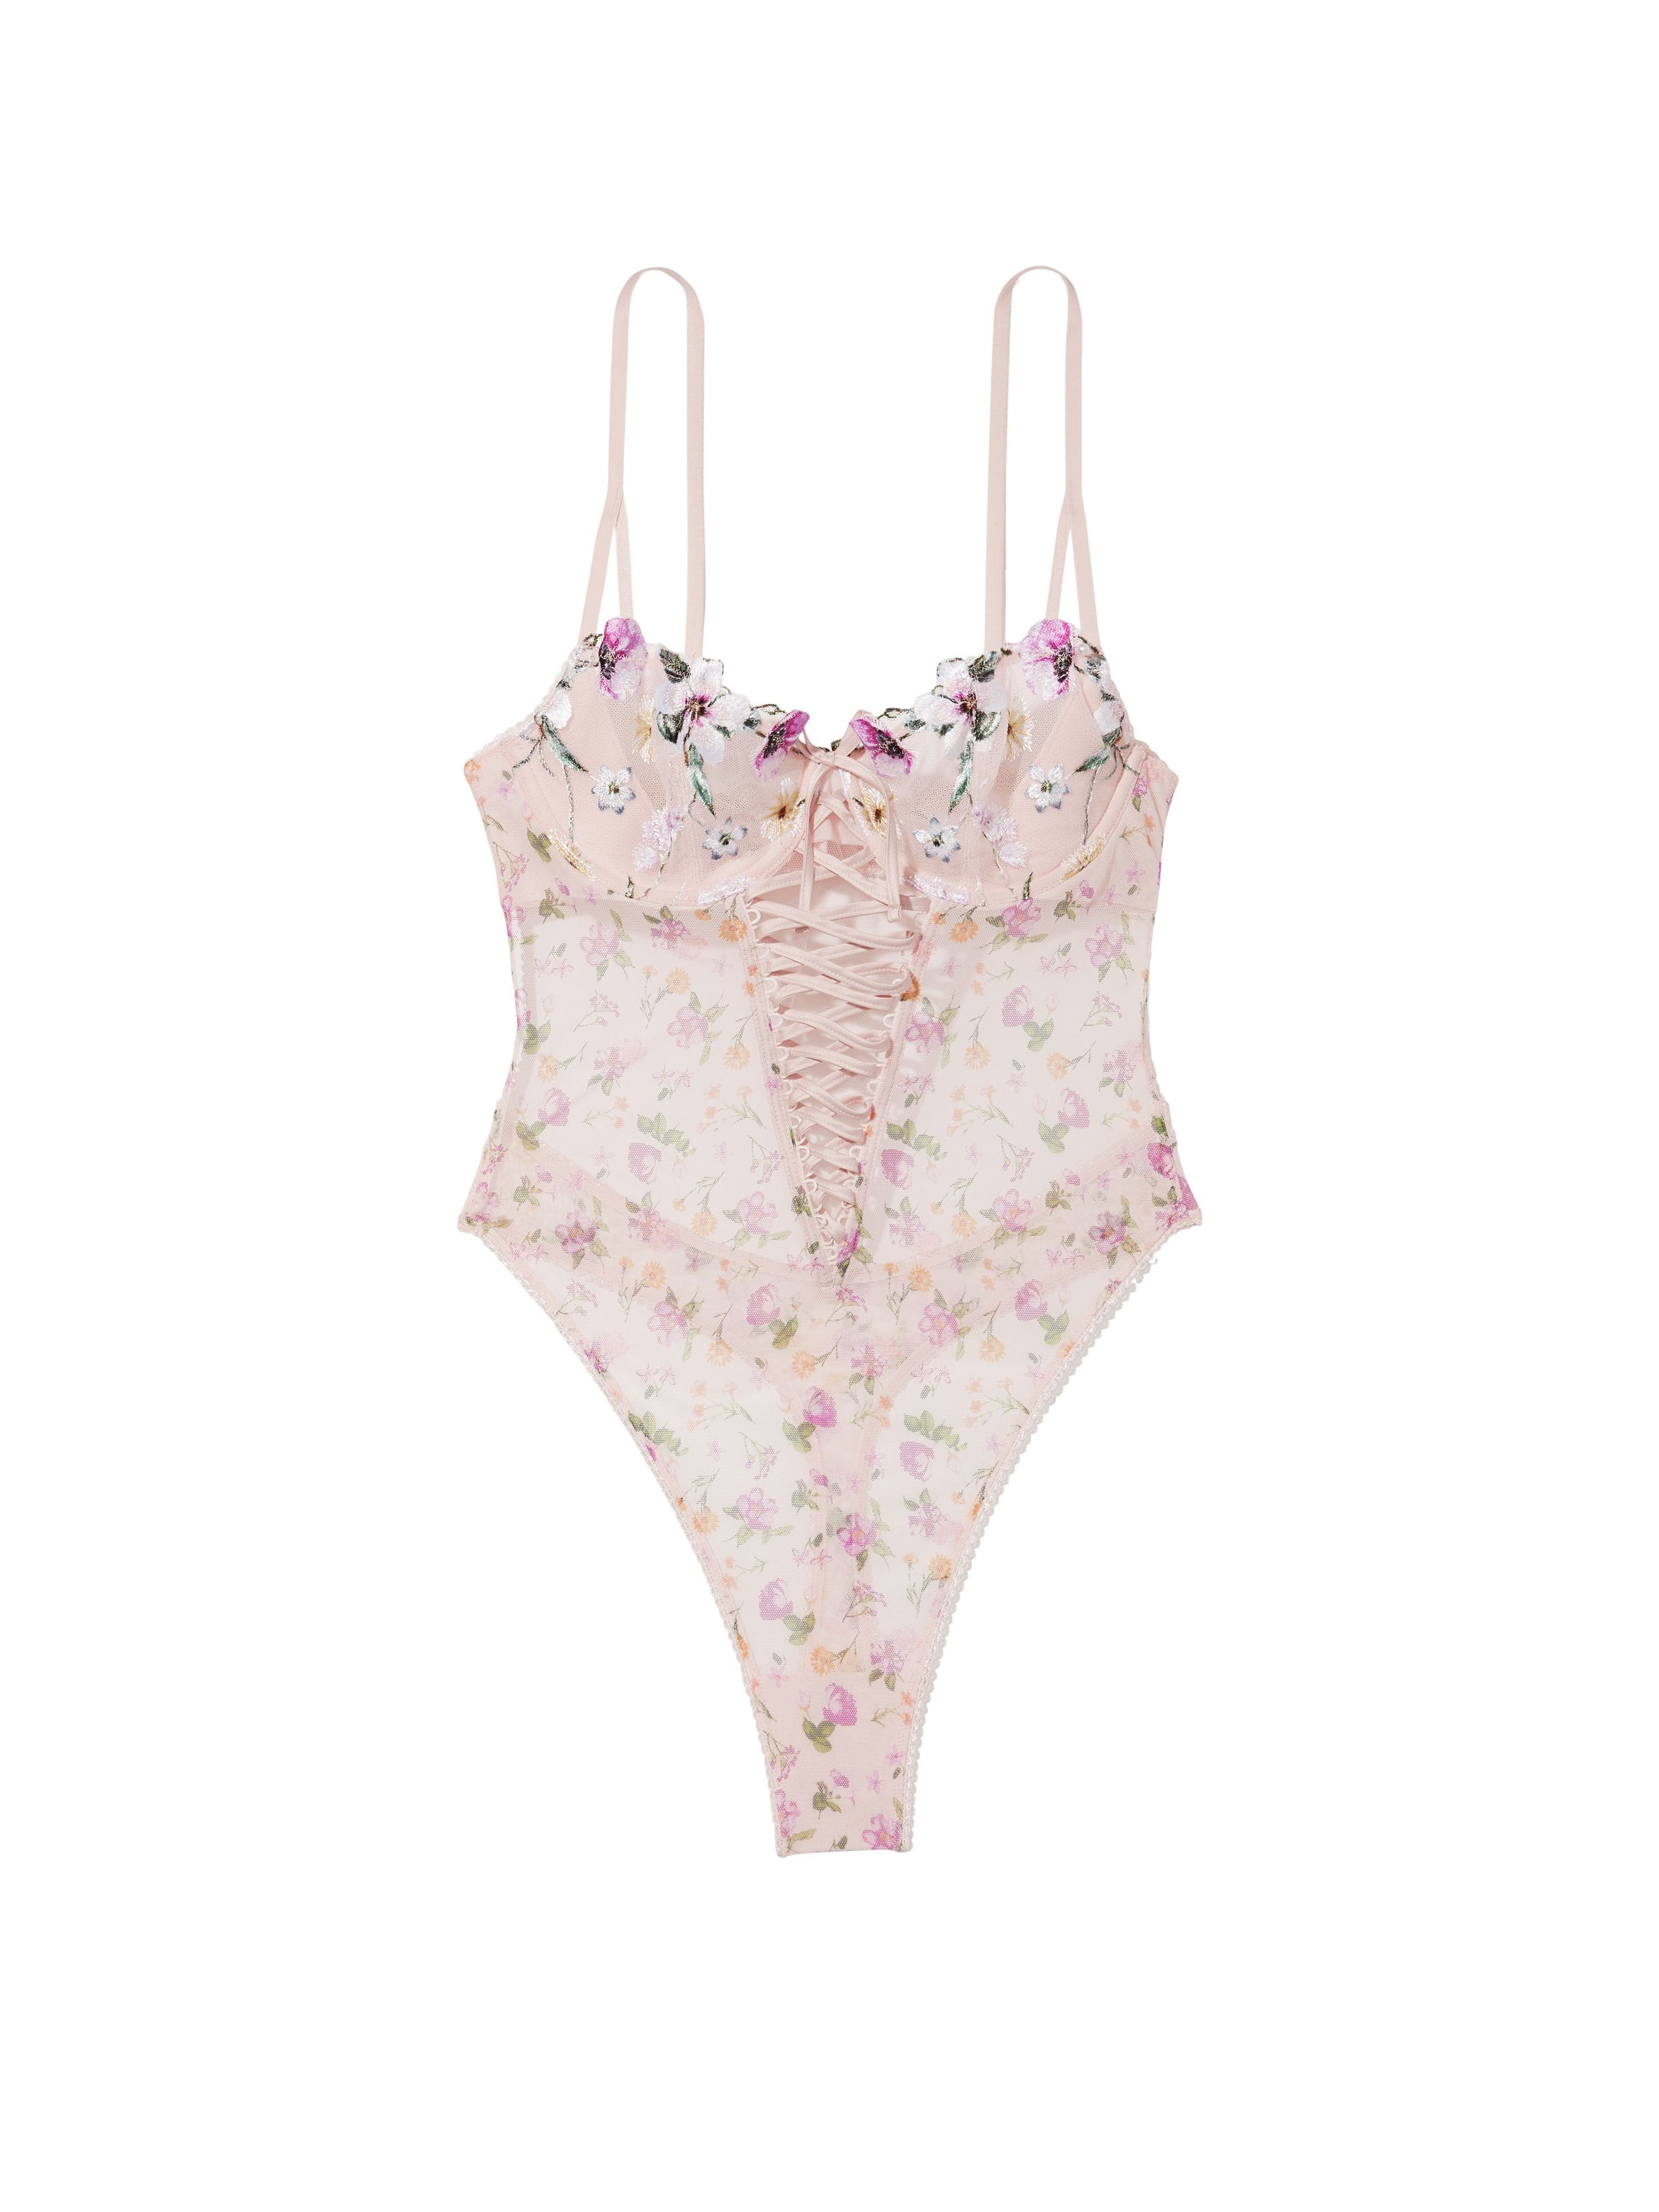 Victoria's Secret - Craving something a little extra fun for Valentine's  Day? This teddy's delicate floral lace, shine straps and keyhole back give  all the glam you need.